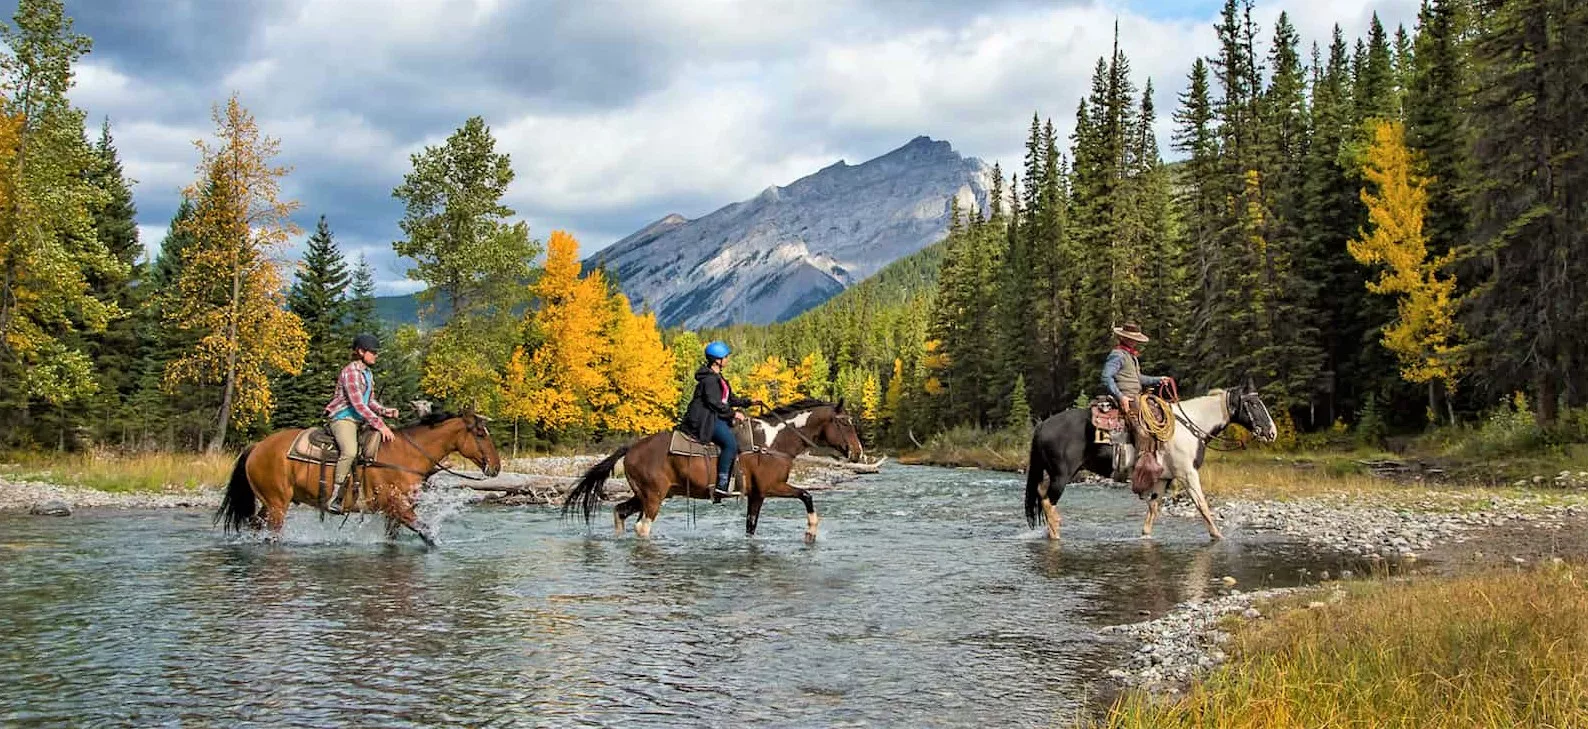 Warner Stables - Banff Trail Riders in Canada, North America | Horseback Riding - Rated 4.7